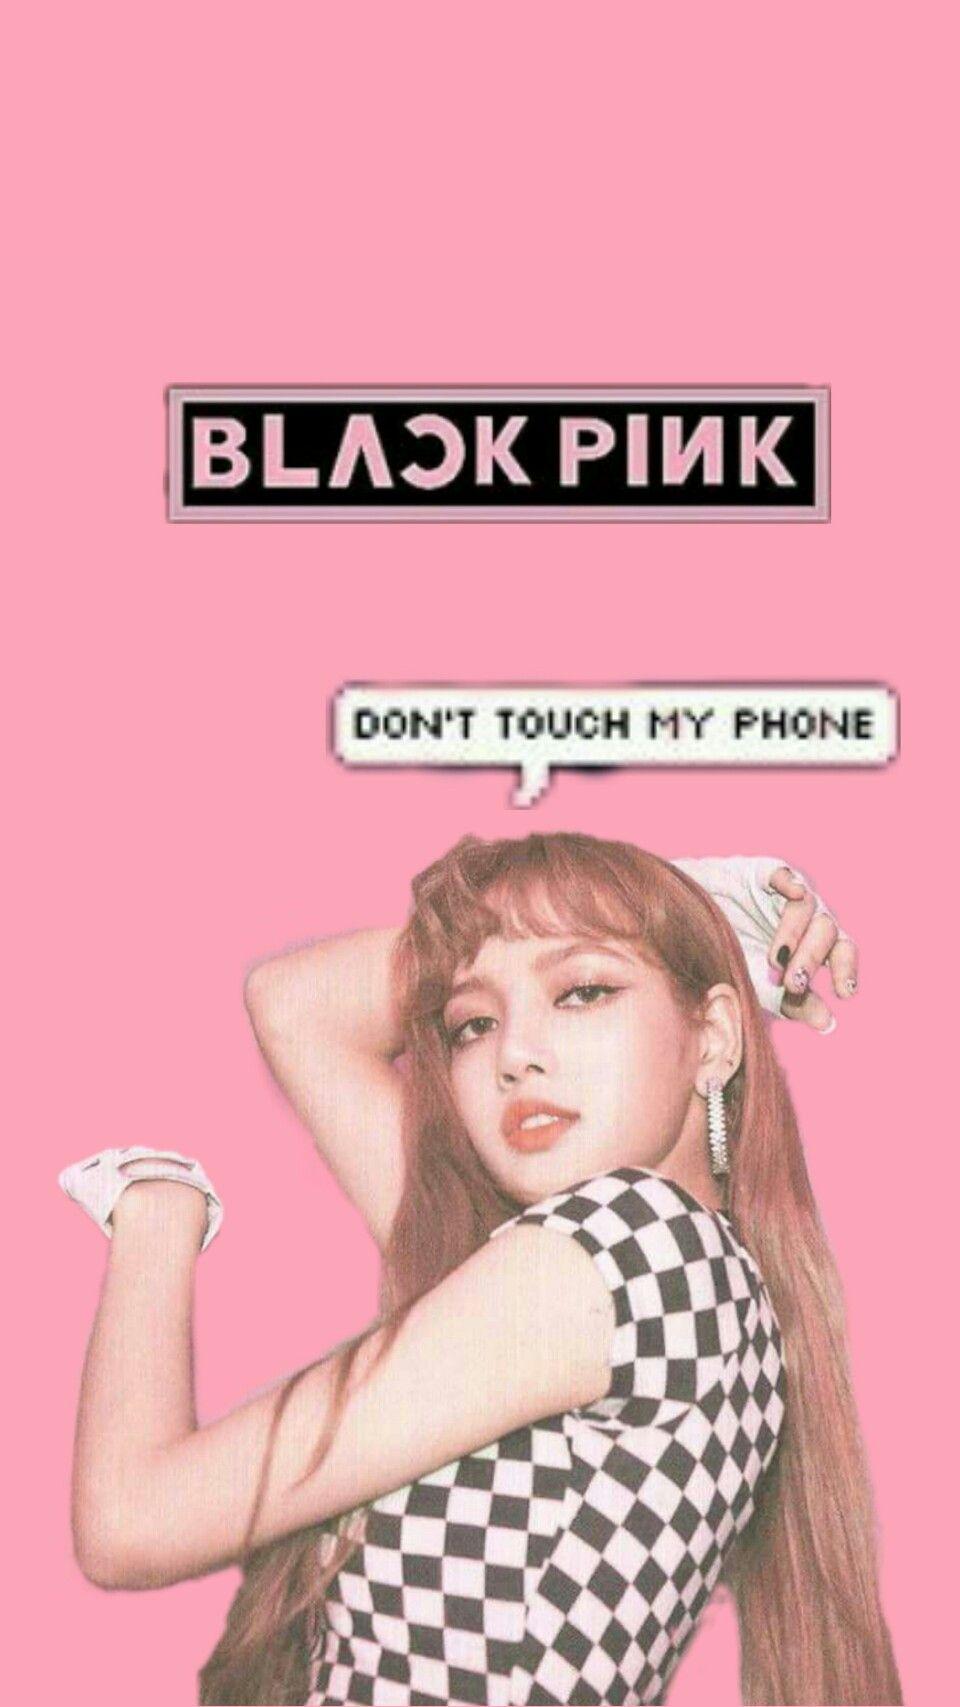 don't touch my phone wallpaper blackpink. Women fashion in 2019